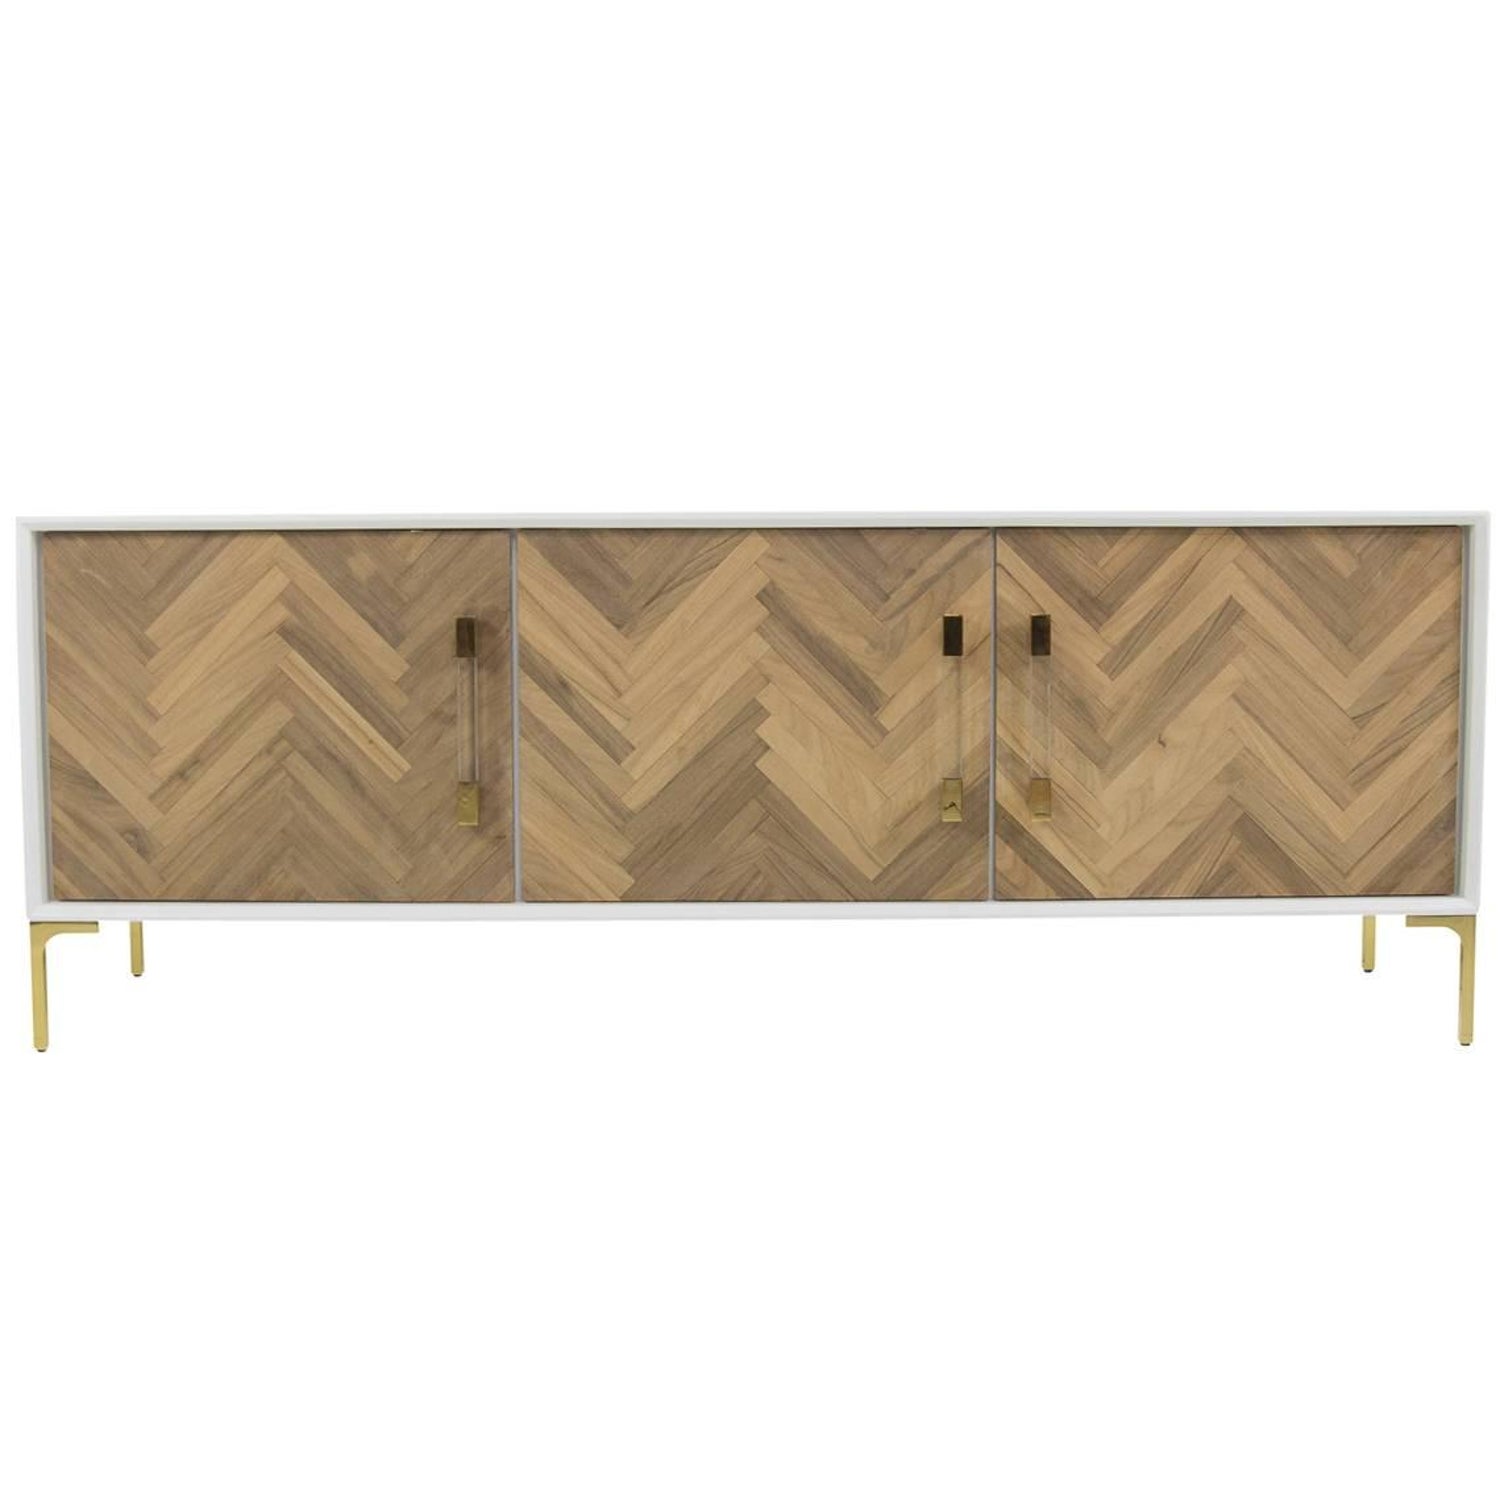 Mid-Century Style 3-Door Amalfi Credenza in White w/ Recycled Wood Door  Fronts For Sale at 1stDibs